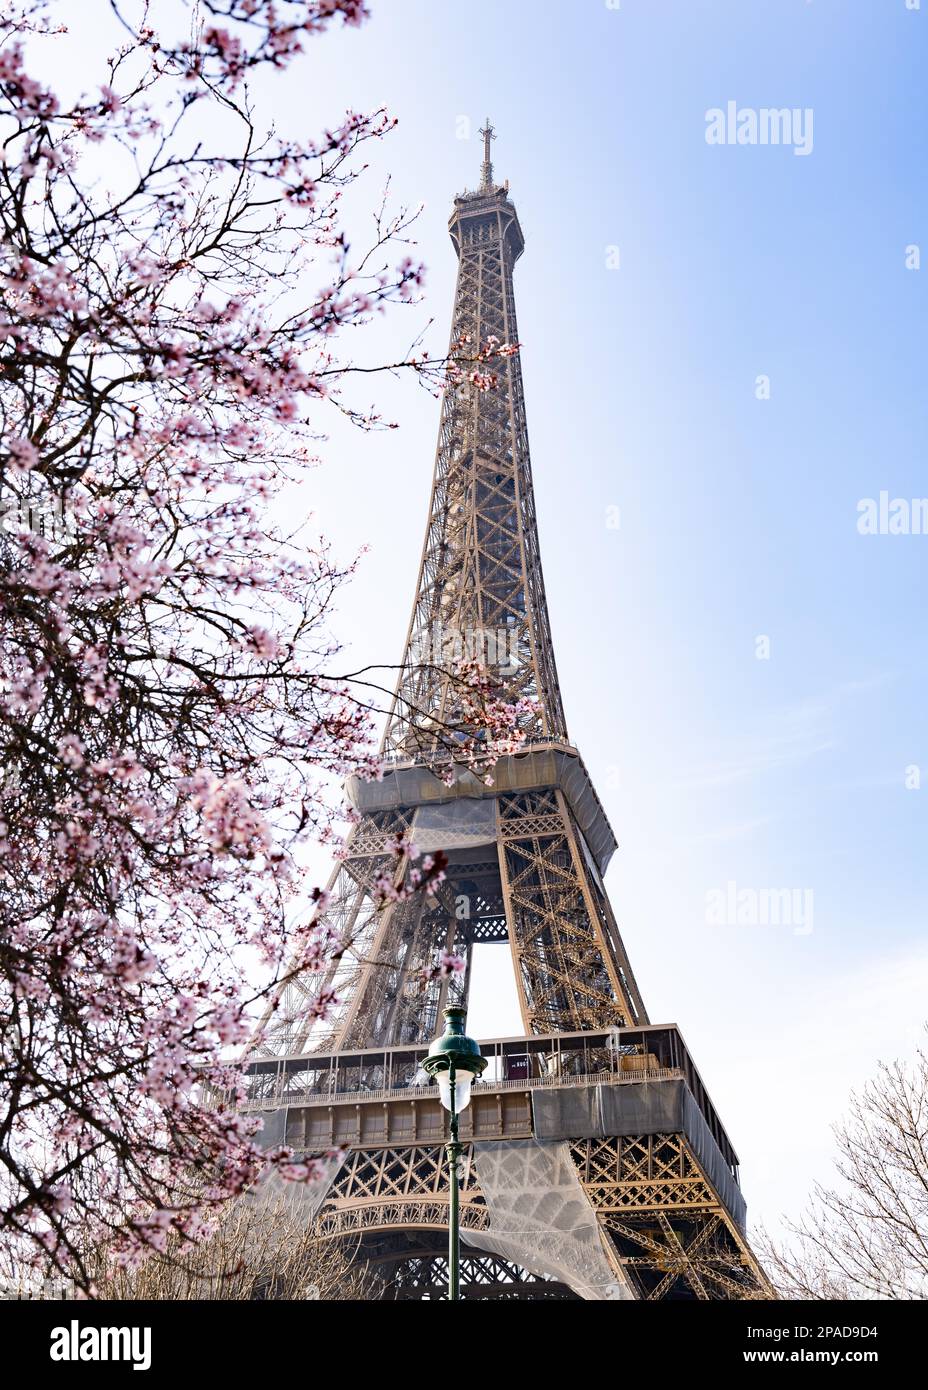 Cherry Blossom Tree at the Eiffel Tower Stock Photo